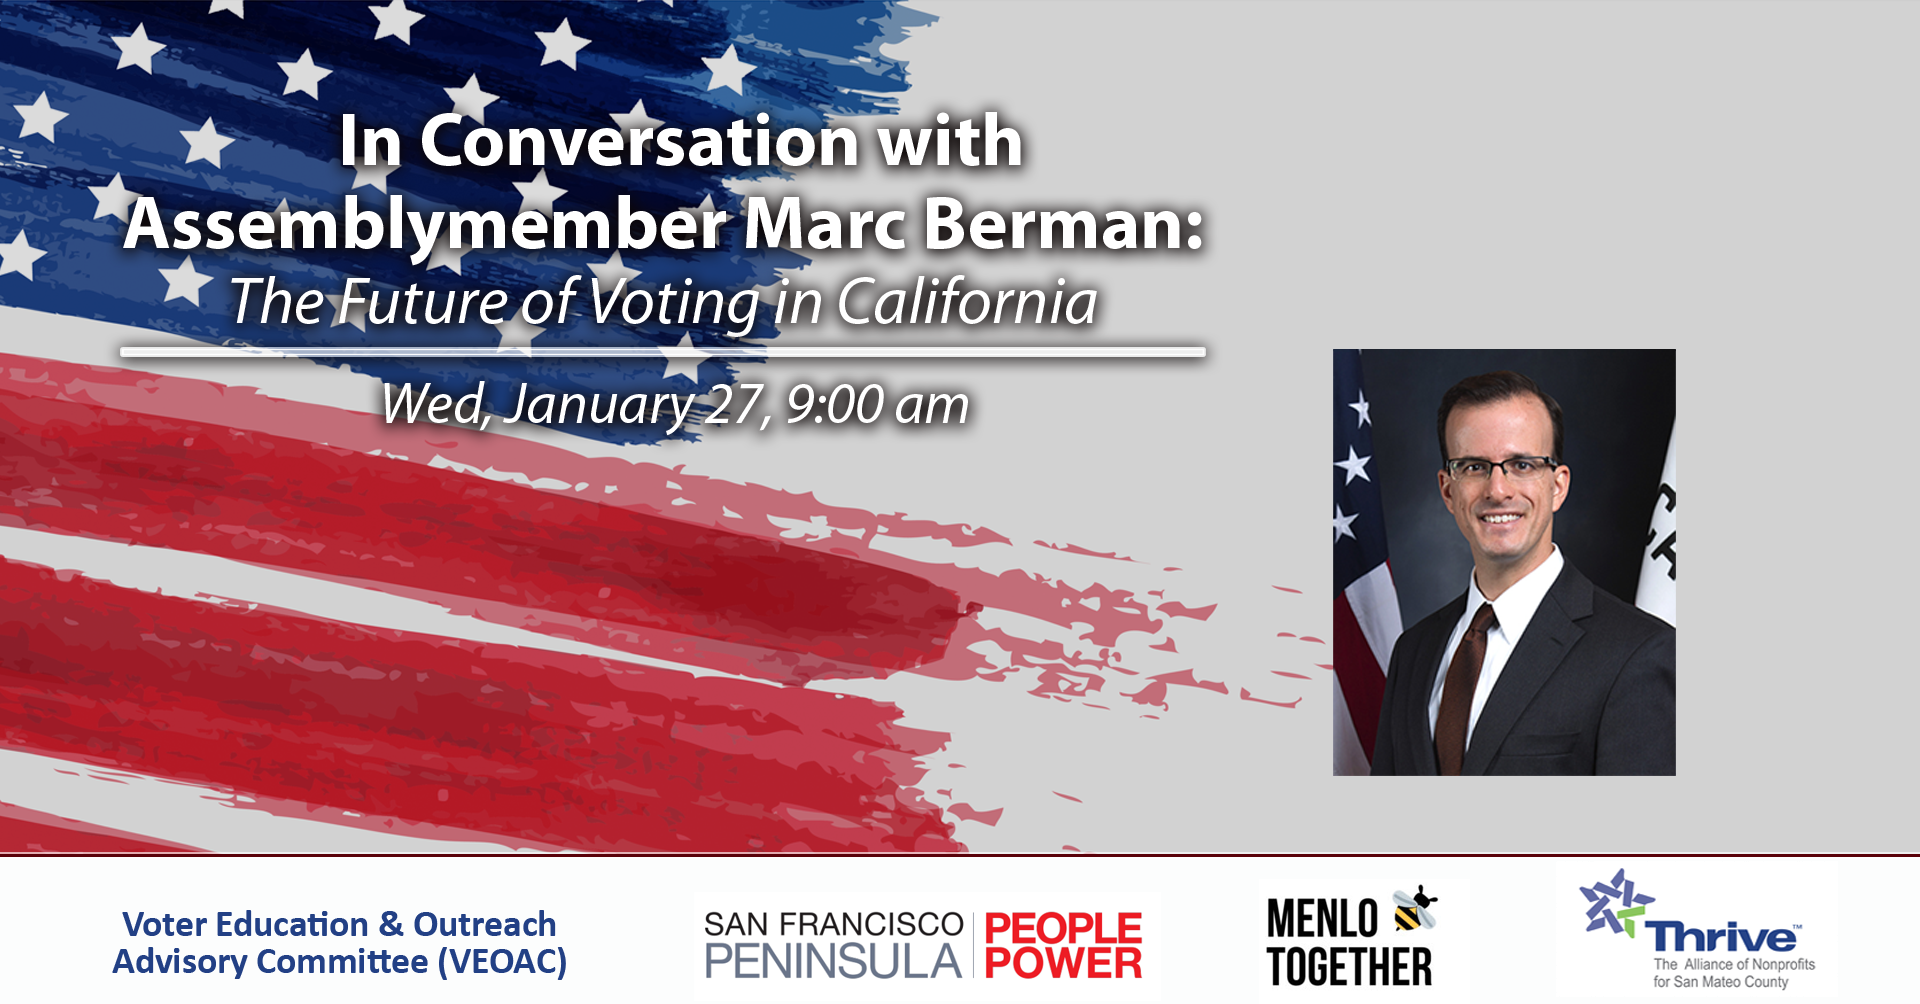 January 27, 2021: In Conversation with Assemblymember Marc Berman: The Future of Voting in California